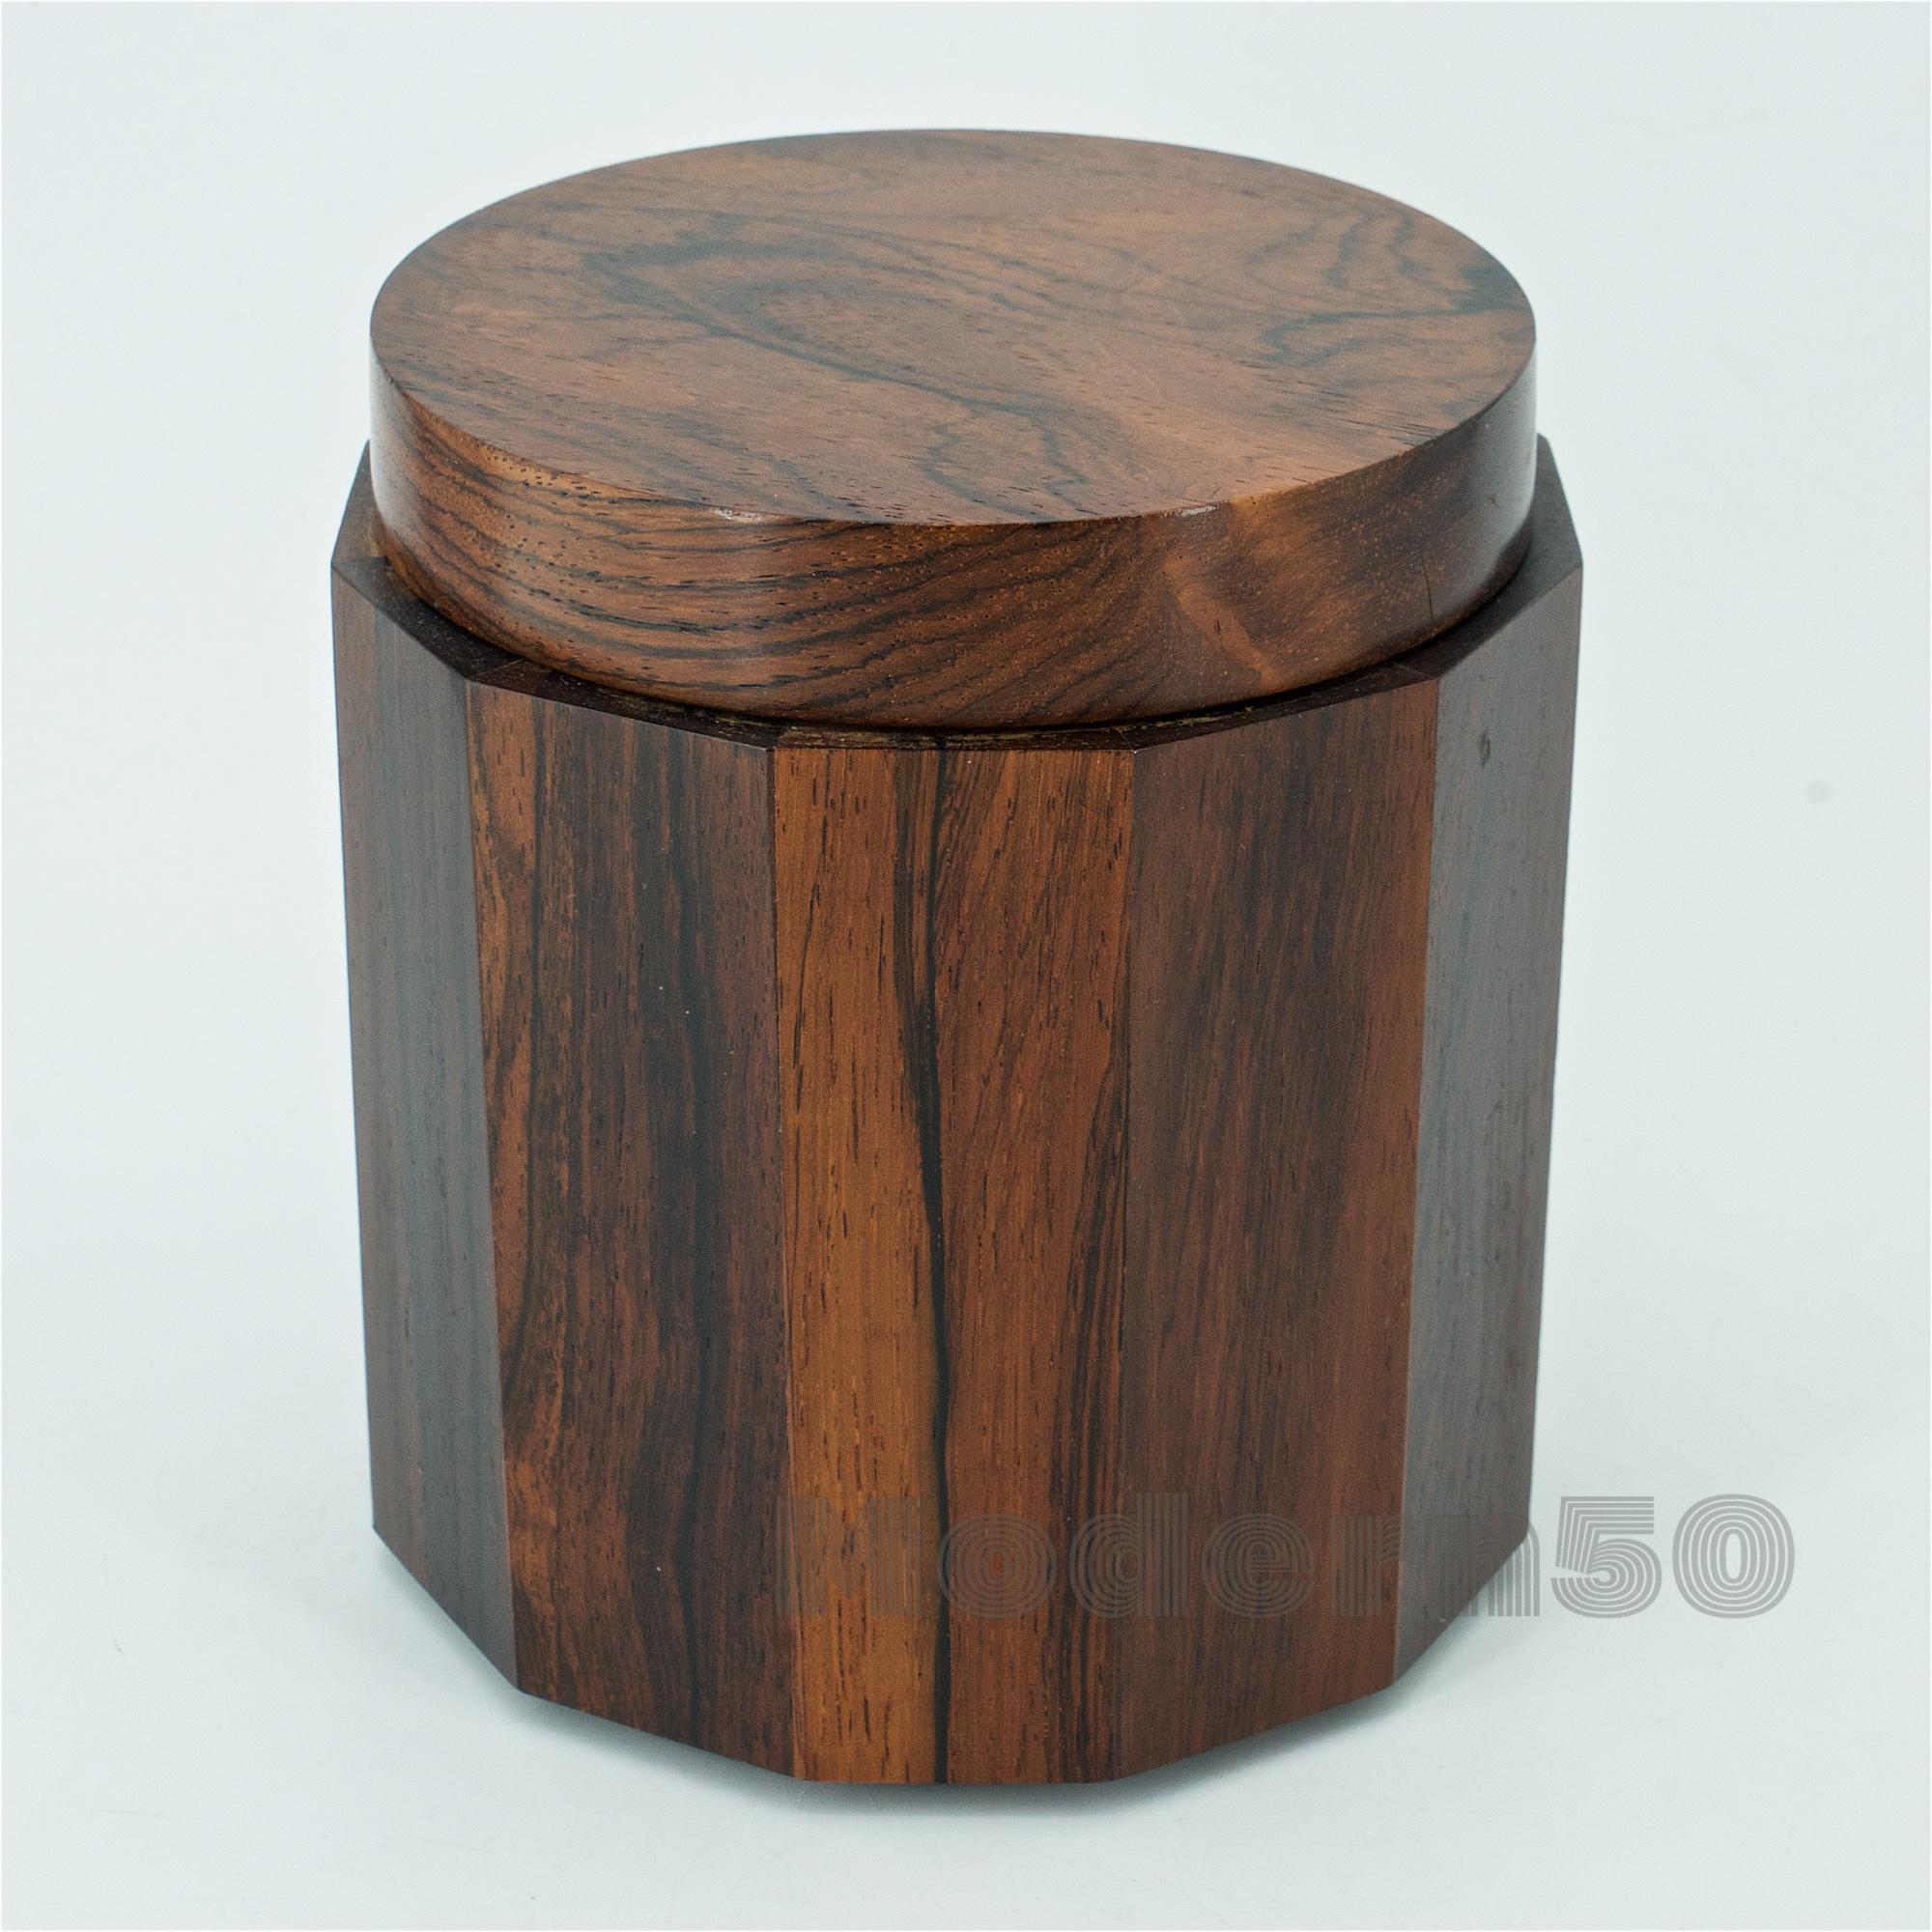 Heavy solid Brazilian rosewood lidded jar/box, weighing 1 lb. 11 oz. Possibly was designed as a humidor but does not smell of tobacco. Unmarked.